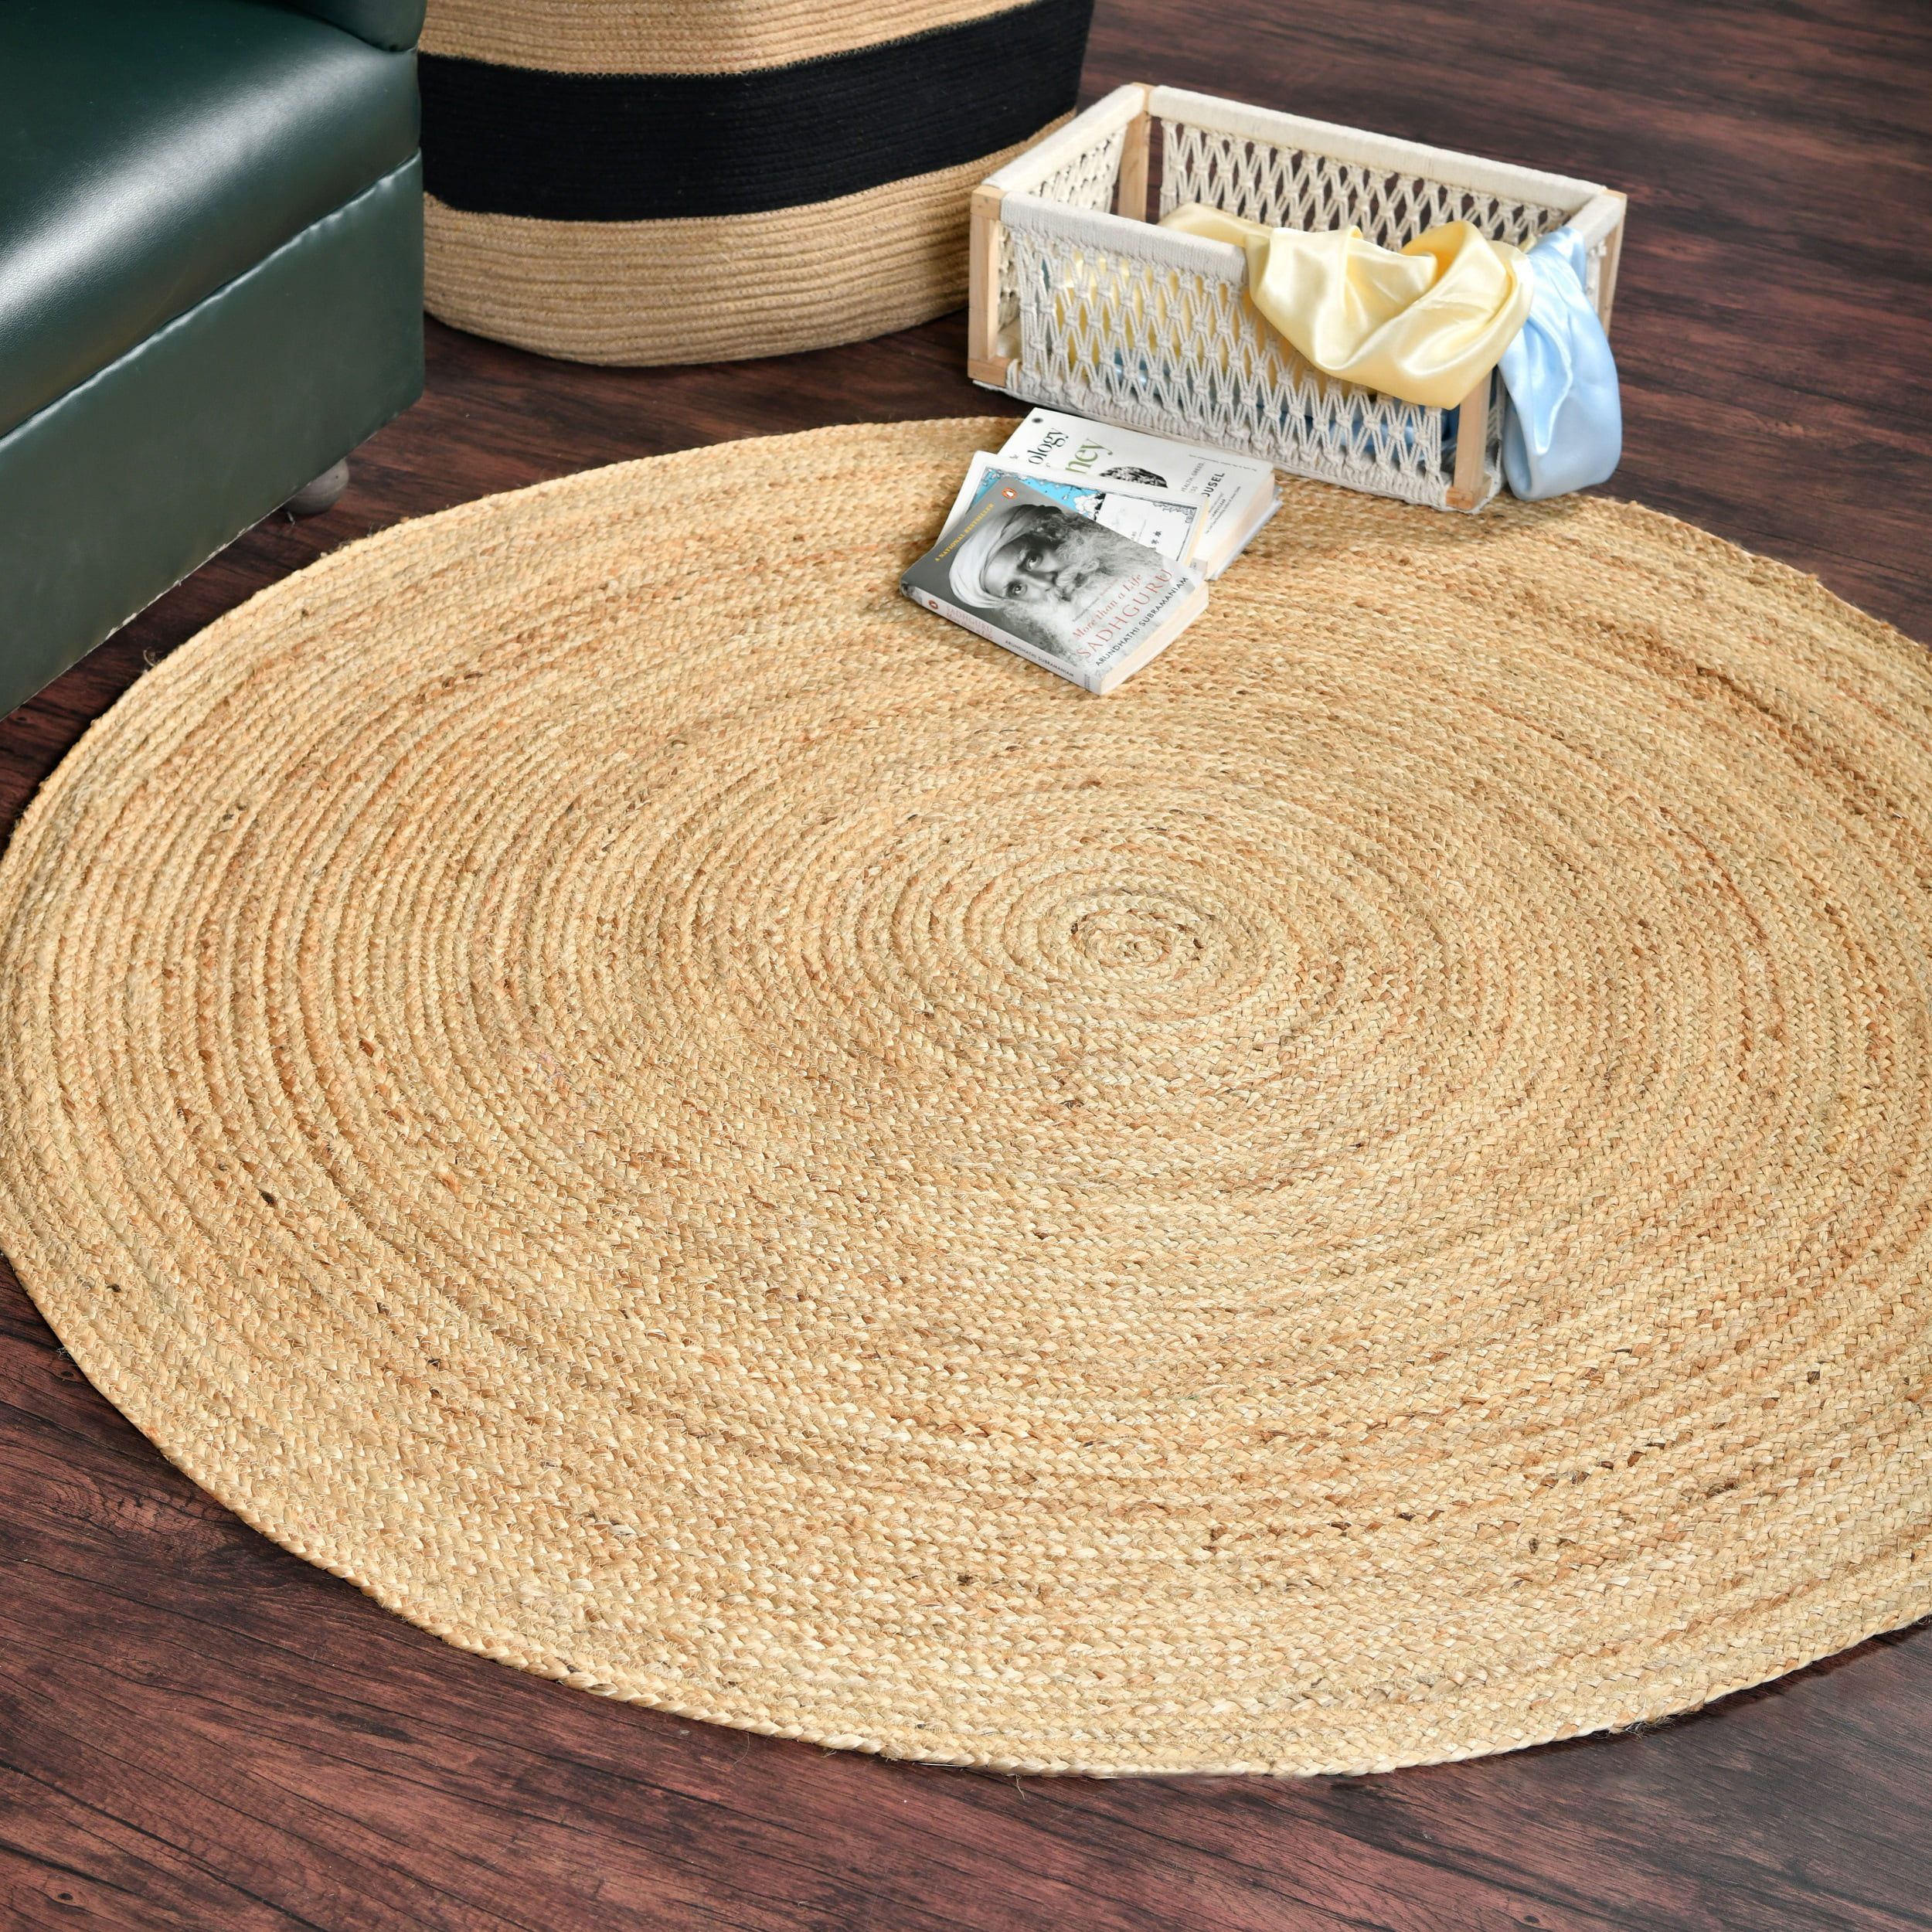 Homemonde Hand Woven Braided Jute Area Rug 6 Ft Round Natural Reversible  Rugs For Kitchen Living Room Entryway – Walmart For Hand Woven Braided Rugs (Photo 2 of 15)